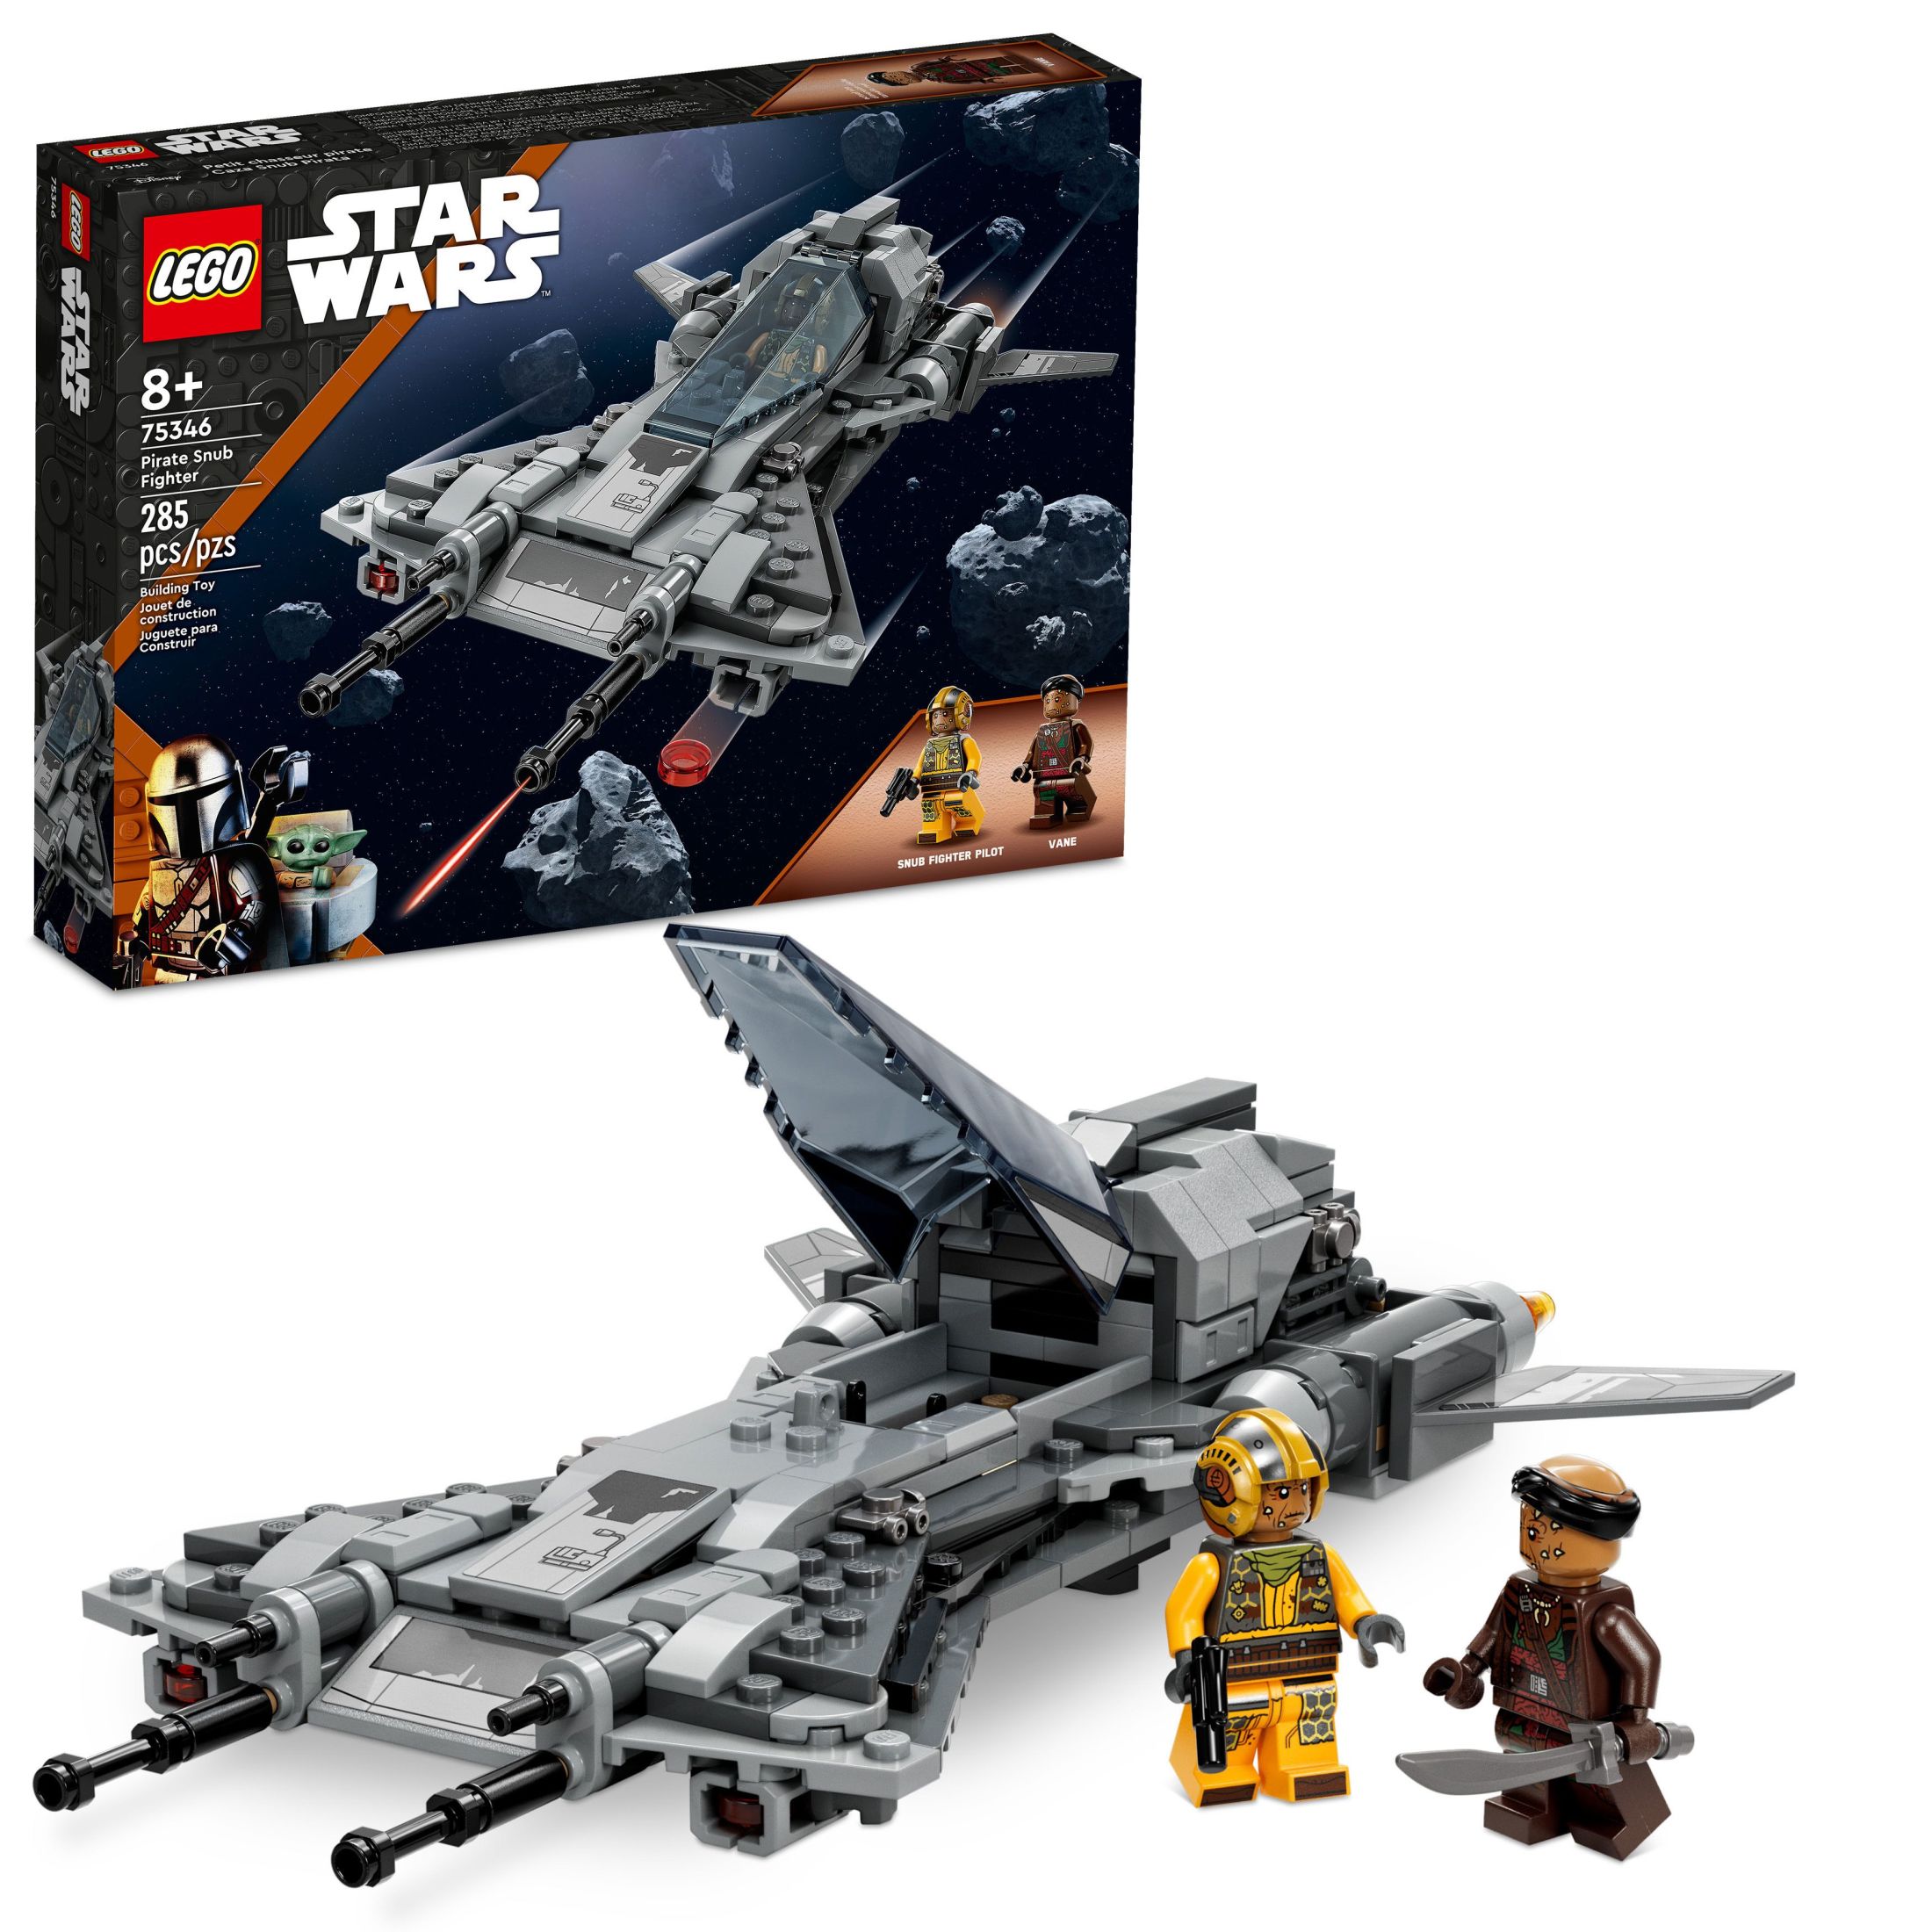 LEGO Star Wars Pirate Snub Fighter 75346 Buildable Starfighter Playset Featuring Pirate Pilot and Vane Characters from the Mandalorian Season 3, Birthday Gift Idea for Boys and Girls Ages 8 and up - image 1 of 10